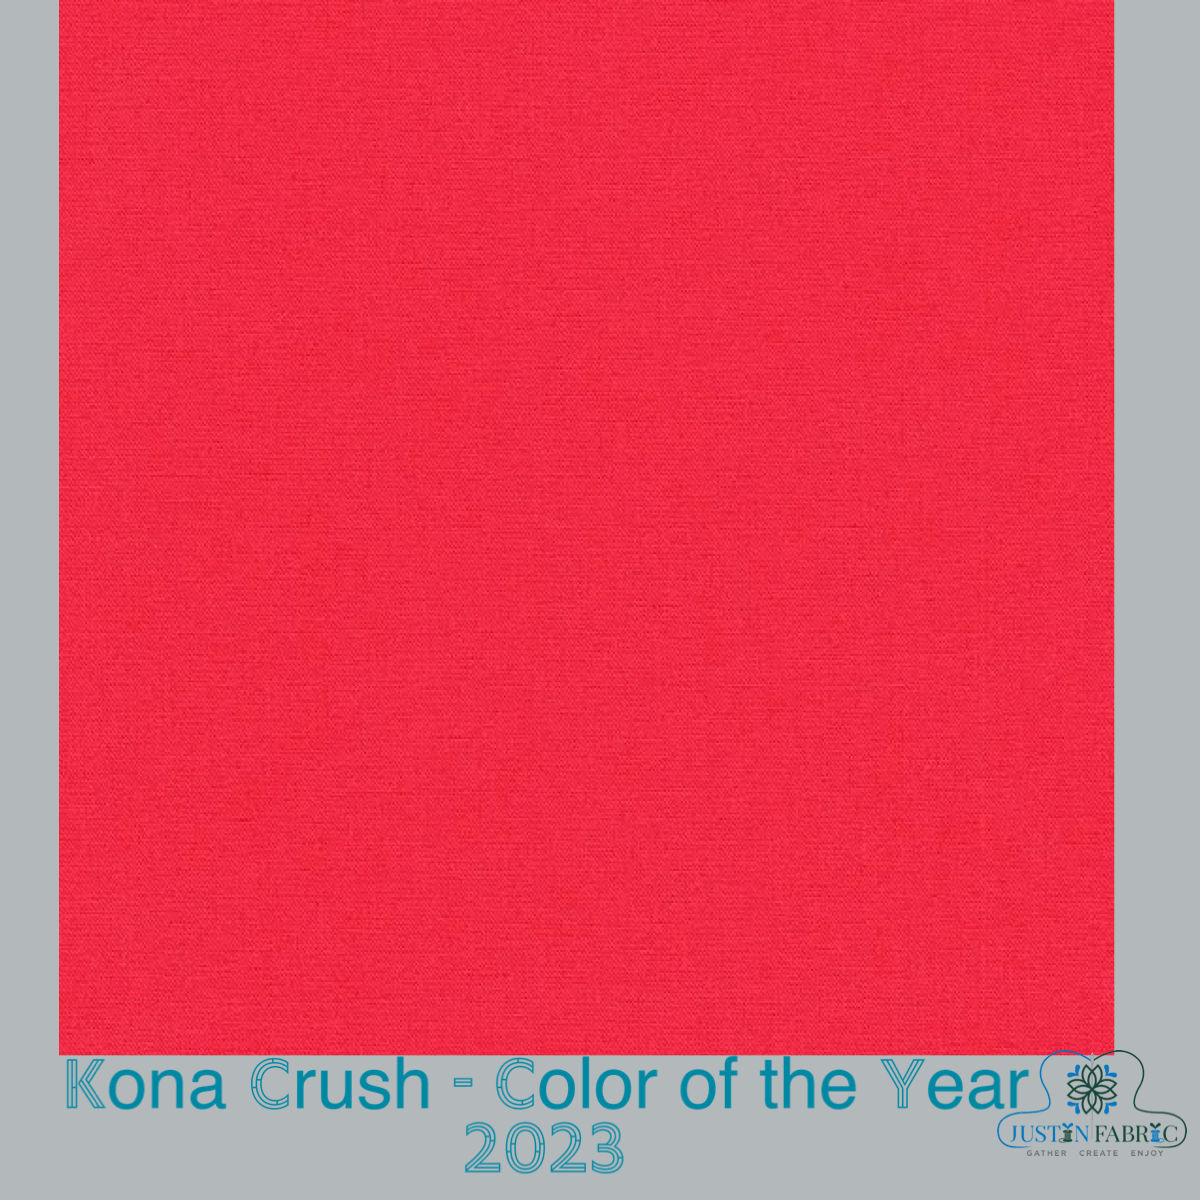 Kona Cotton Crush Color of the Year 2023 Layer Cake 10 inch